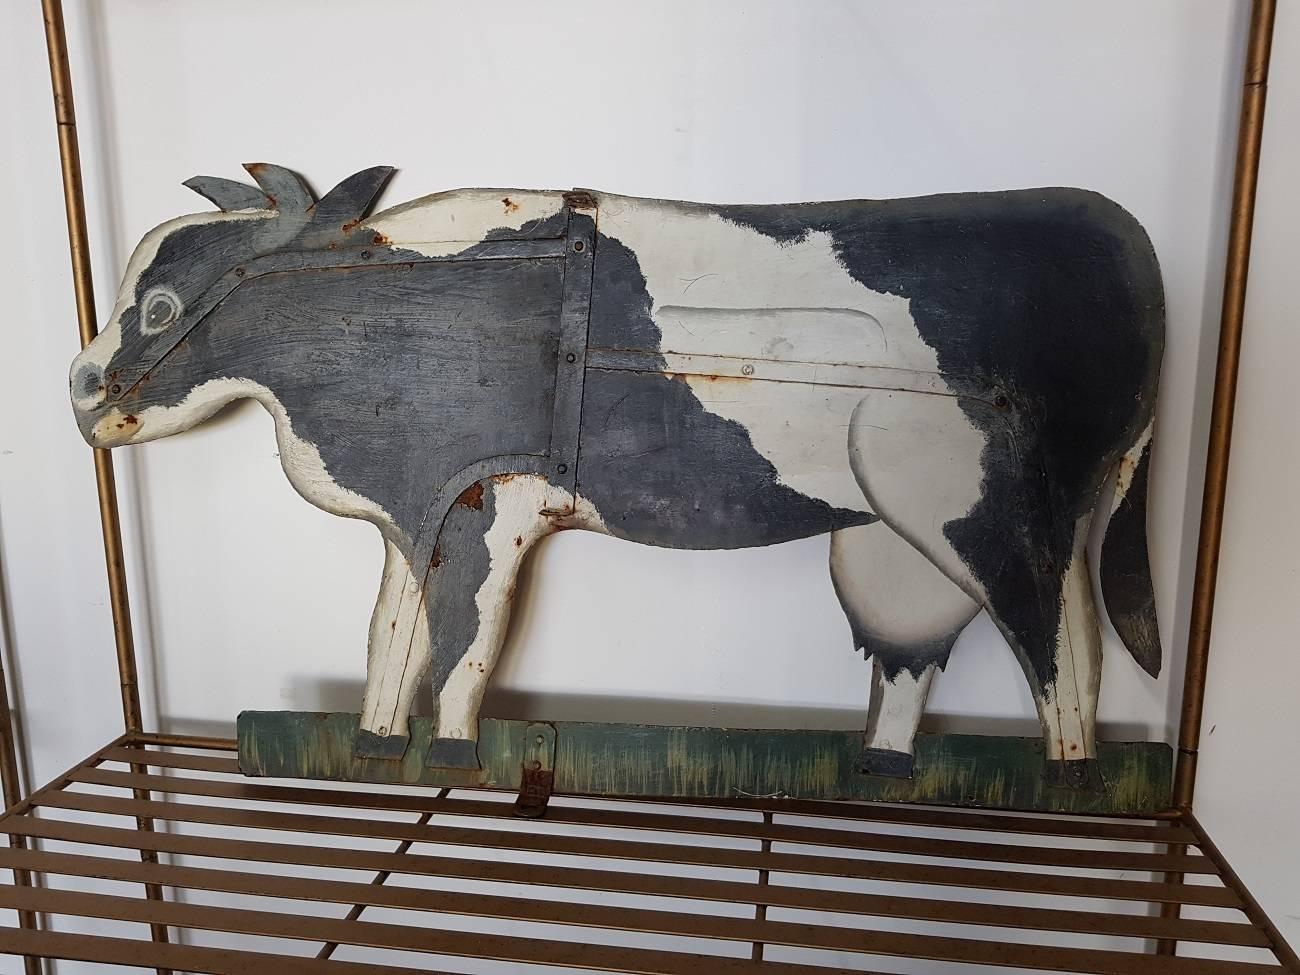 Metal painted weather vane in the form of a cow, this one is made circa 1900, the parts are nailed to each other and then hand-painted. Truly a unique piece of home Folk Art from a farm, great as decoration in any interior or exterior.

The